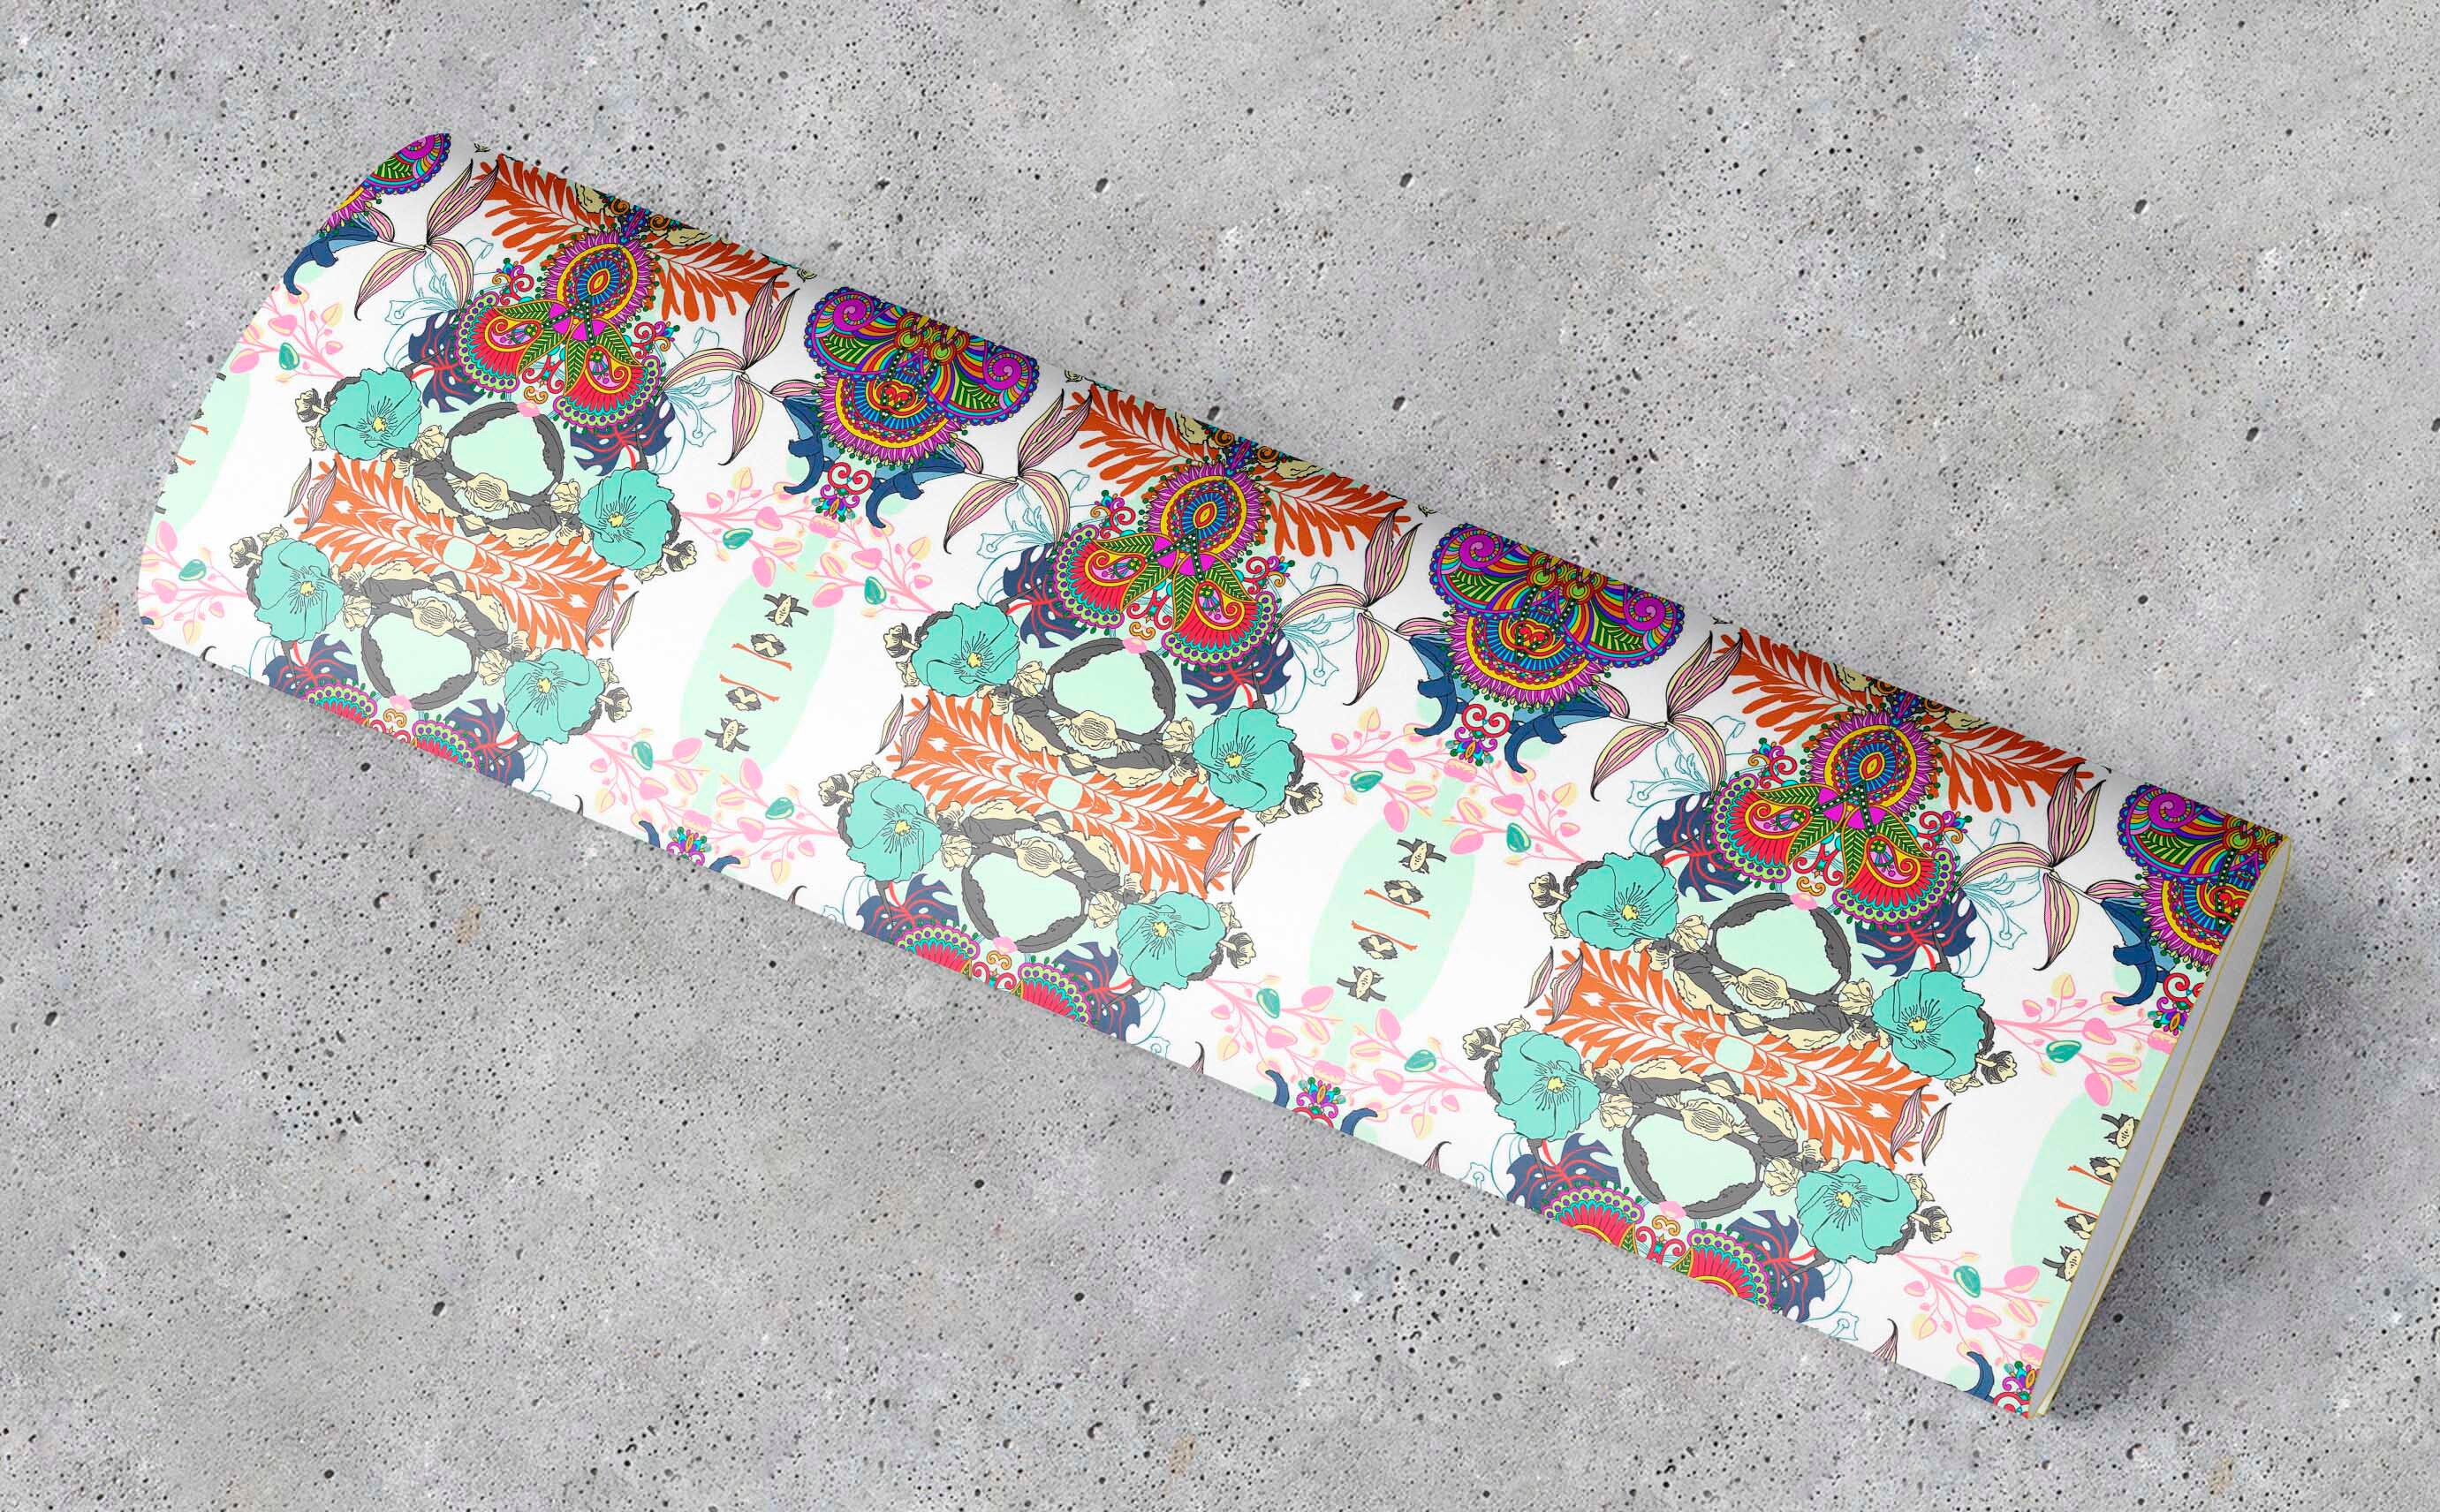 Cute Wrapping Paper Christmas Bundle - Premium Boho Christmas Wrapping  Paper includes 3 Folded Sheets 30 x 20 inches, 3 Coordinating Gift Cards,  and